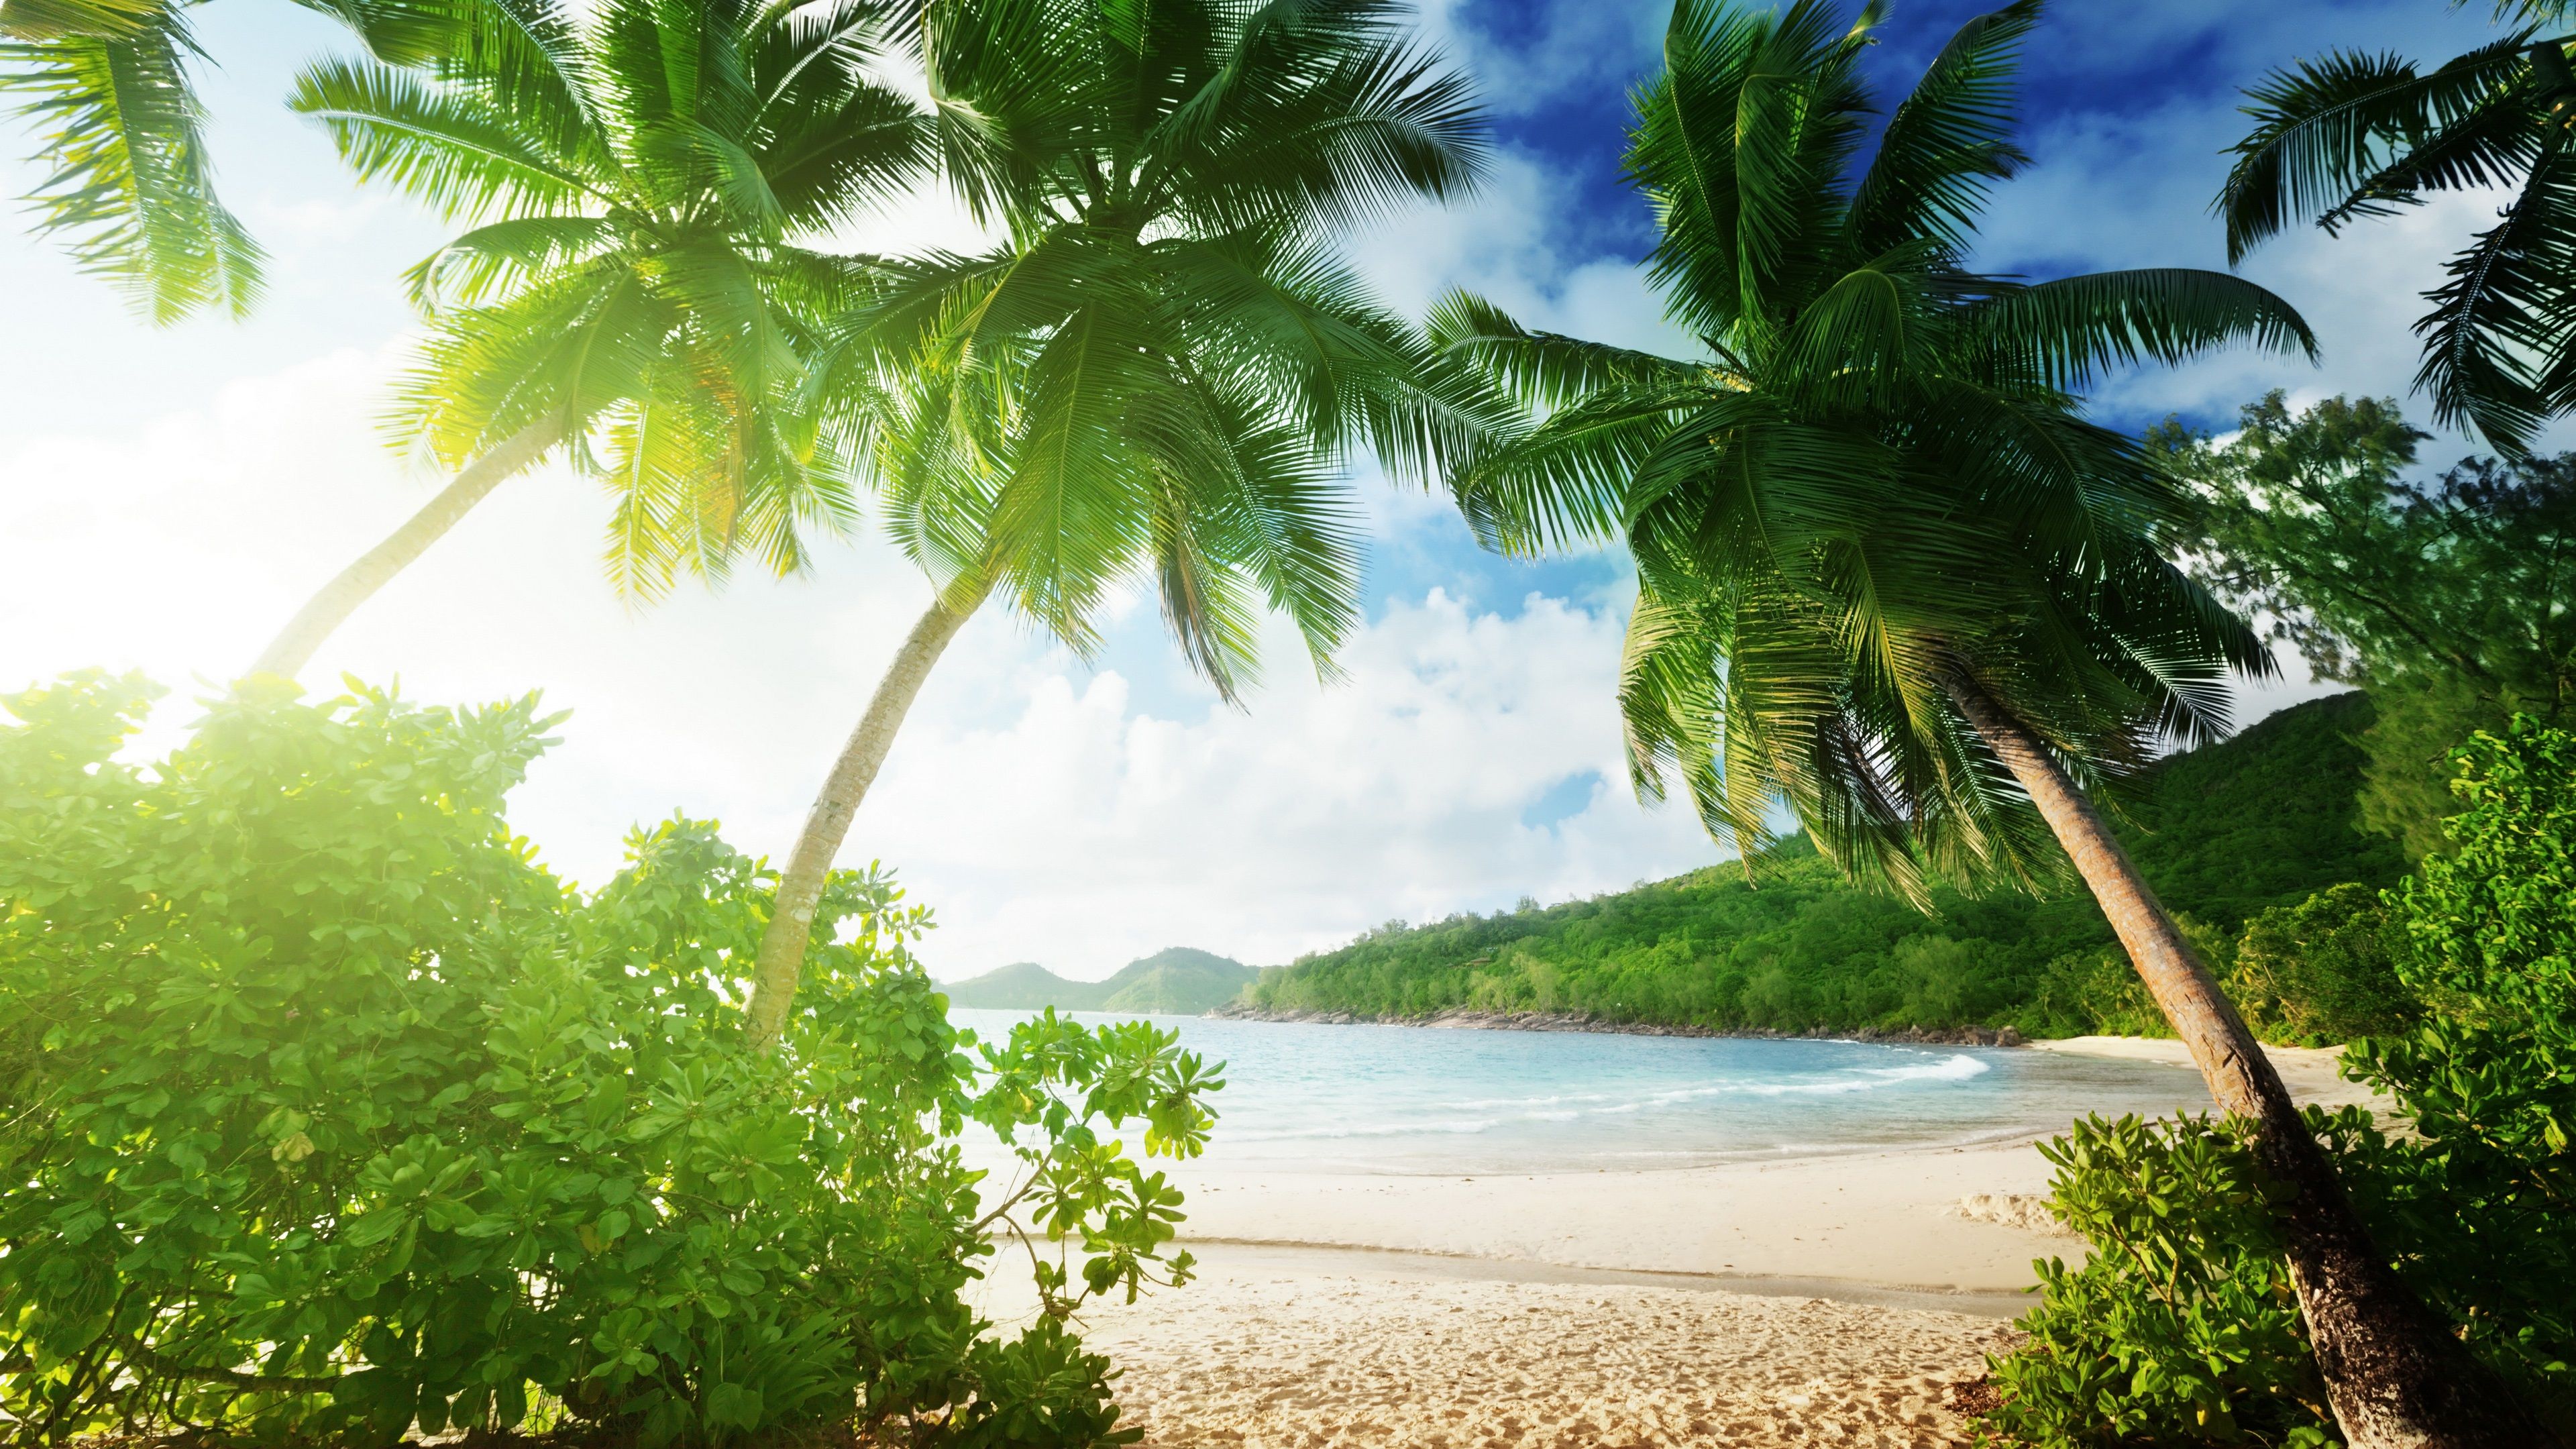 Wallpaper Tropical beach, palm trees, sand, sea, coast, clouds 3840x2160 UHD 4K Picture, Image